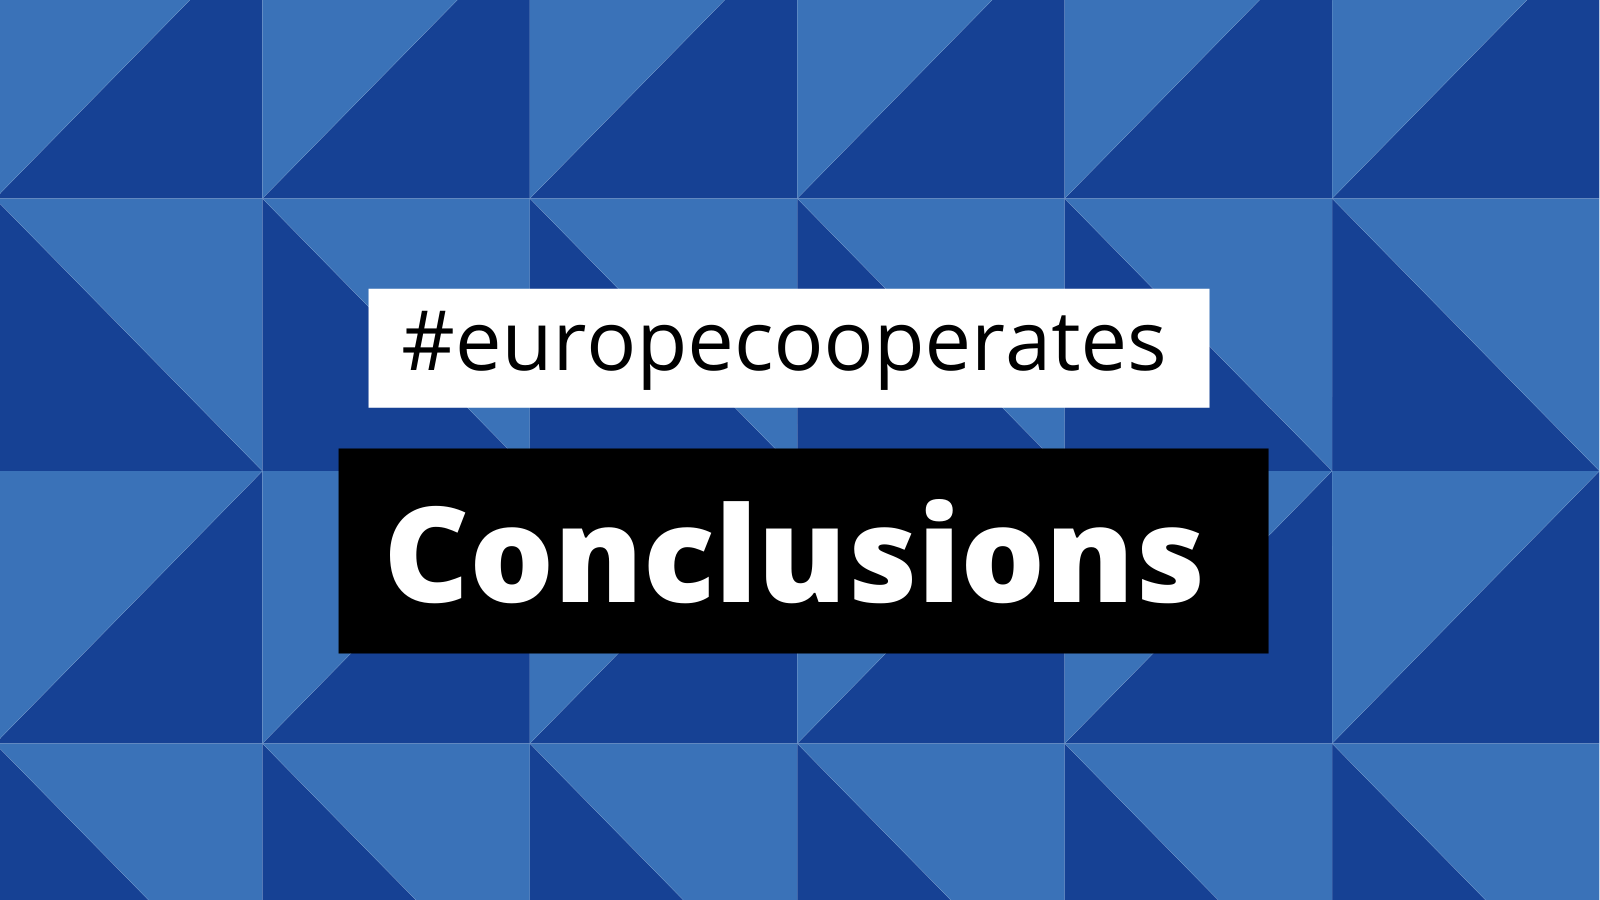 #europecooperates conclusions are available